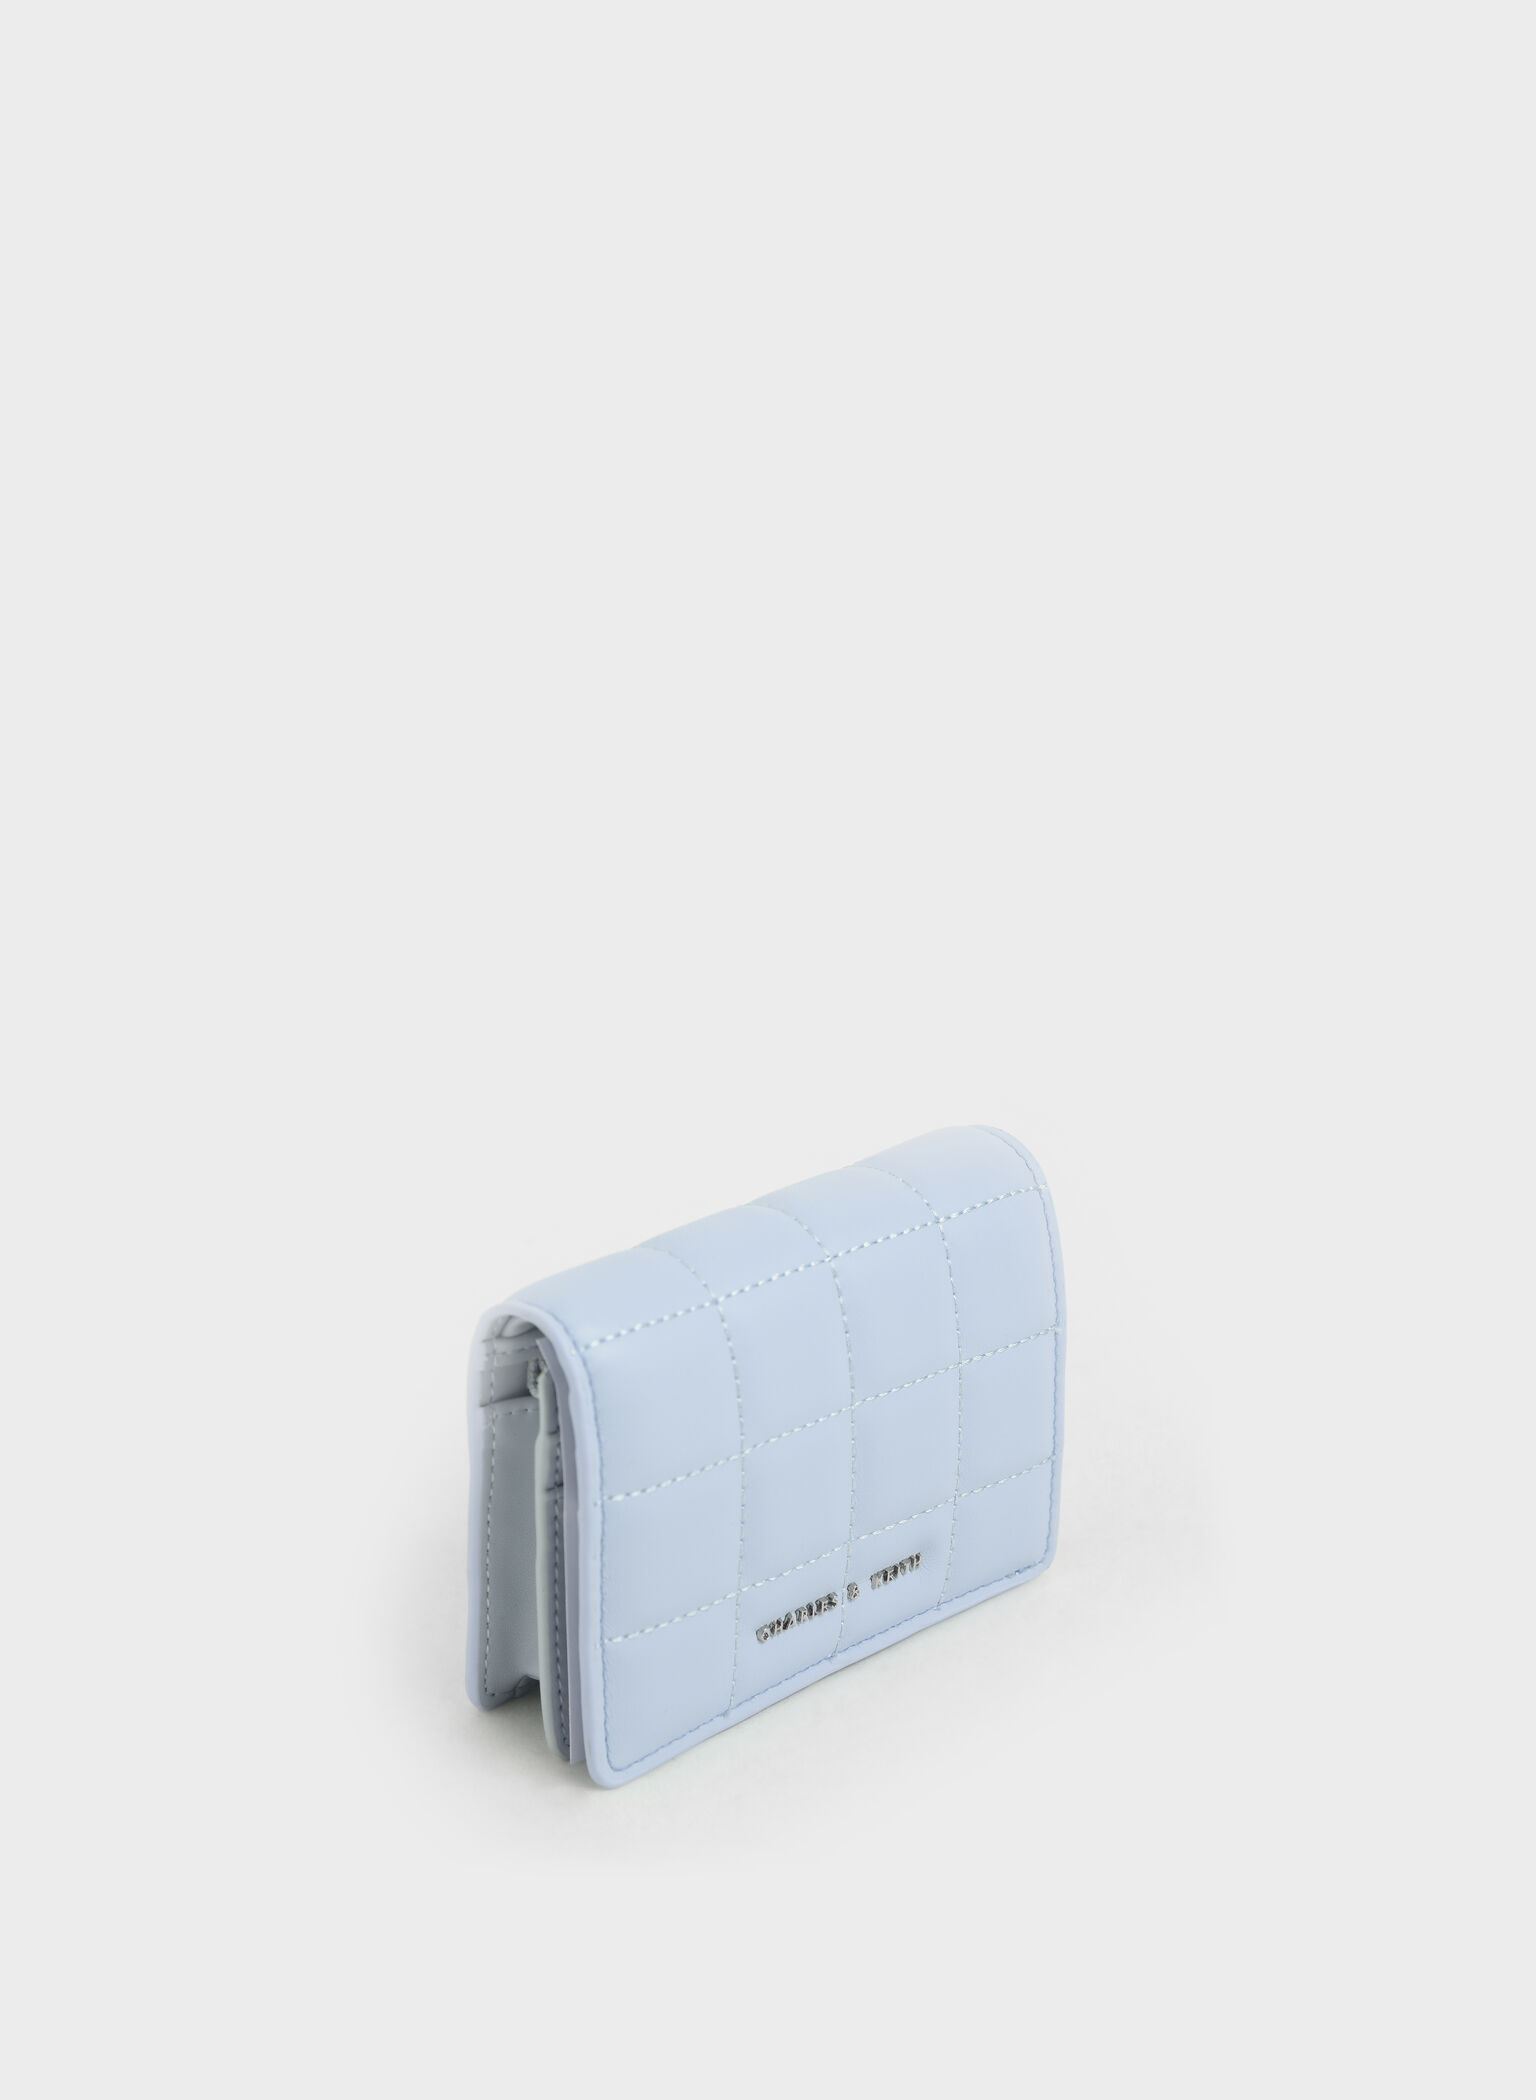 Quilted Mini Wallet, Light Blue, hi-res